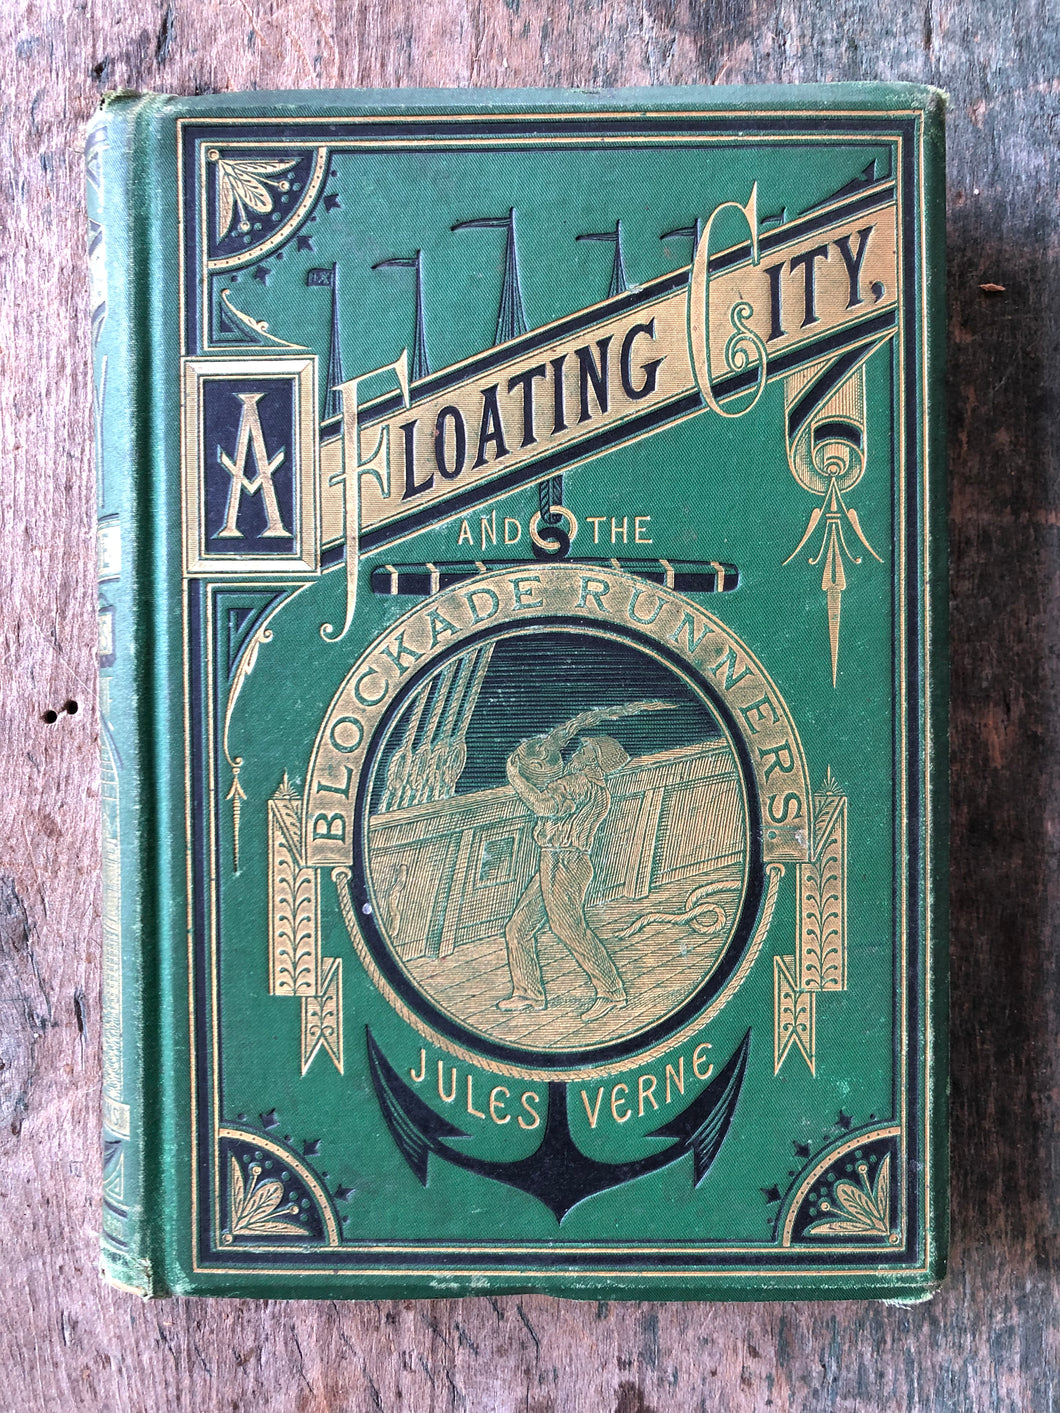 A Floating City and the Blockade Runners. by Jules Verne. FIRST AMERICAN EDITION